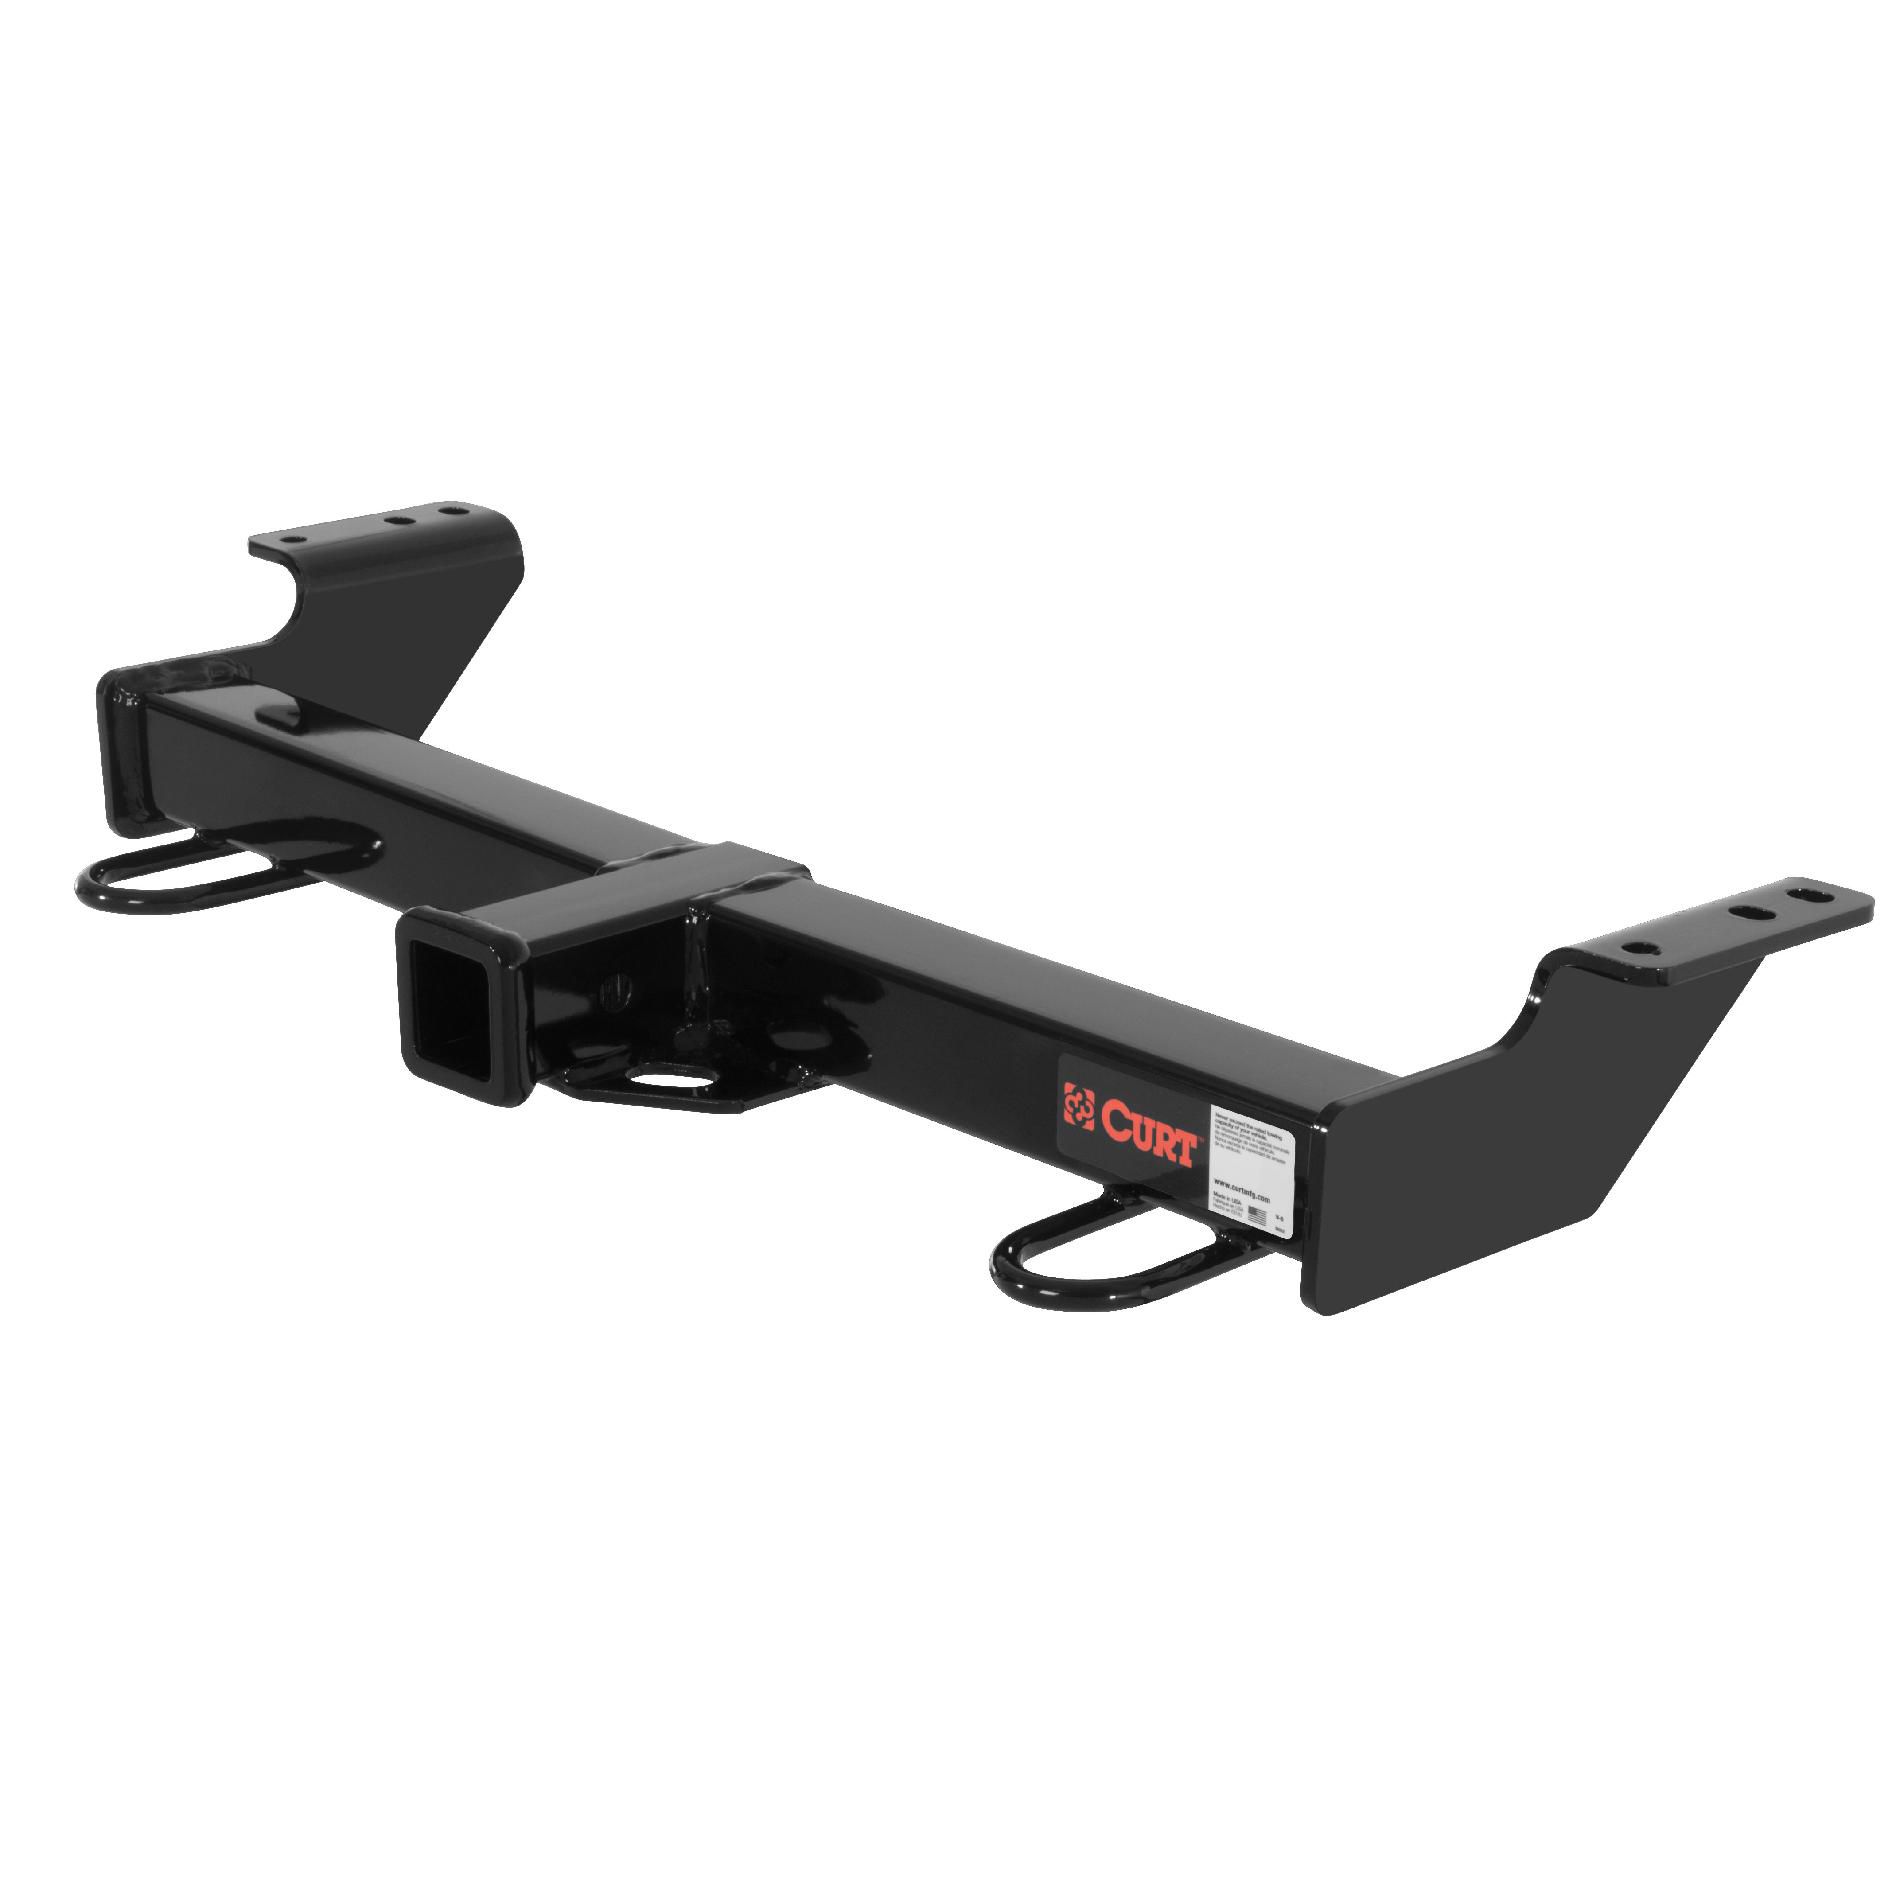 Home Plow by Meyer FHK31180 Hitch for 2000-07 Sequoia & 2000-06 Tundra